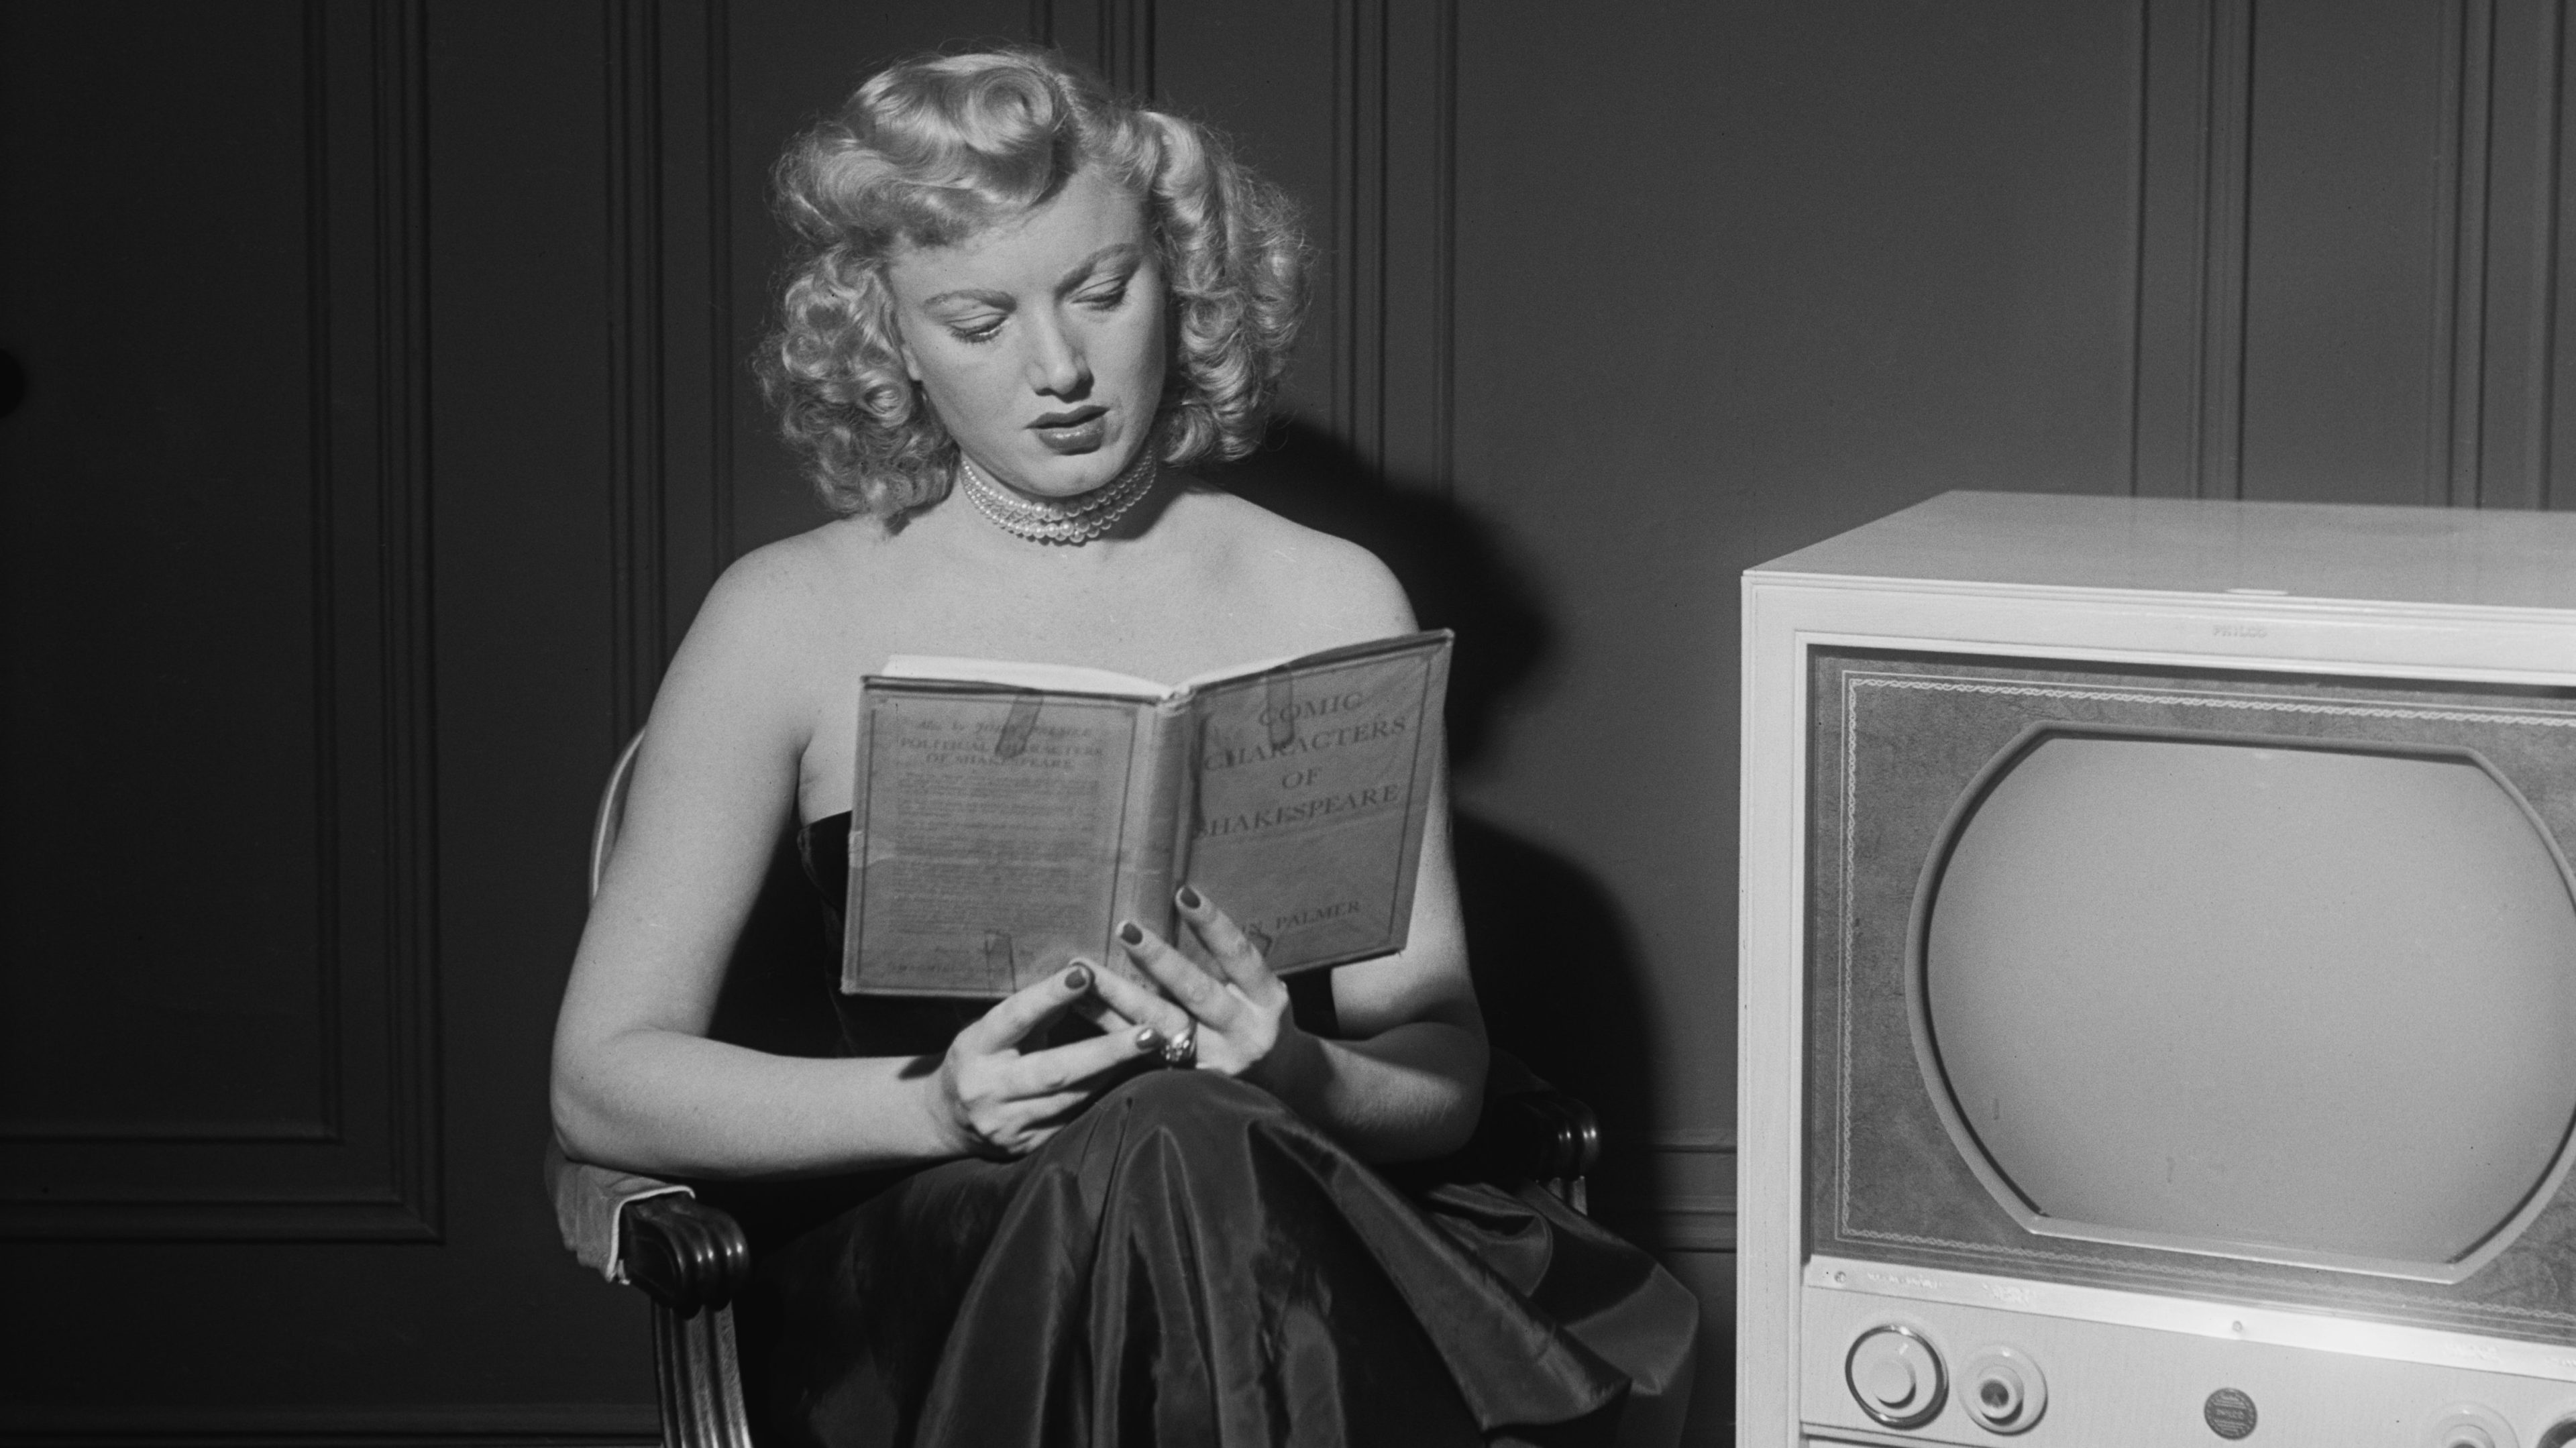 Actress Dagmar reads book beside TV in old black and white photo